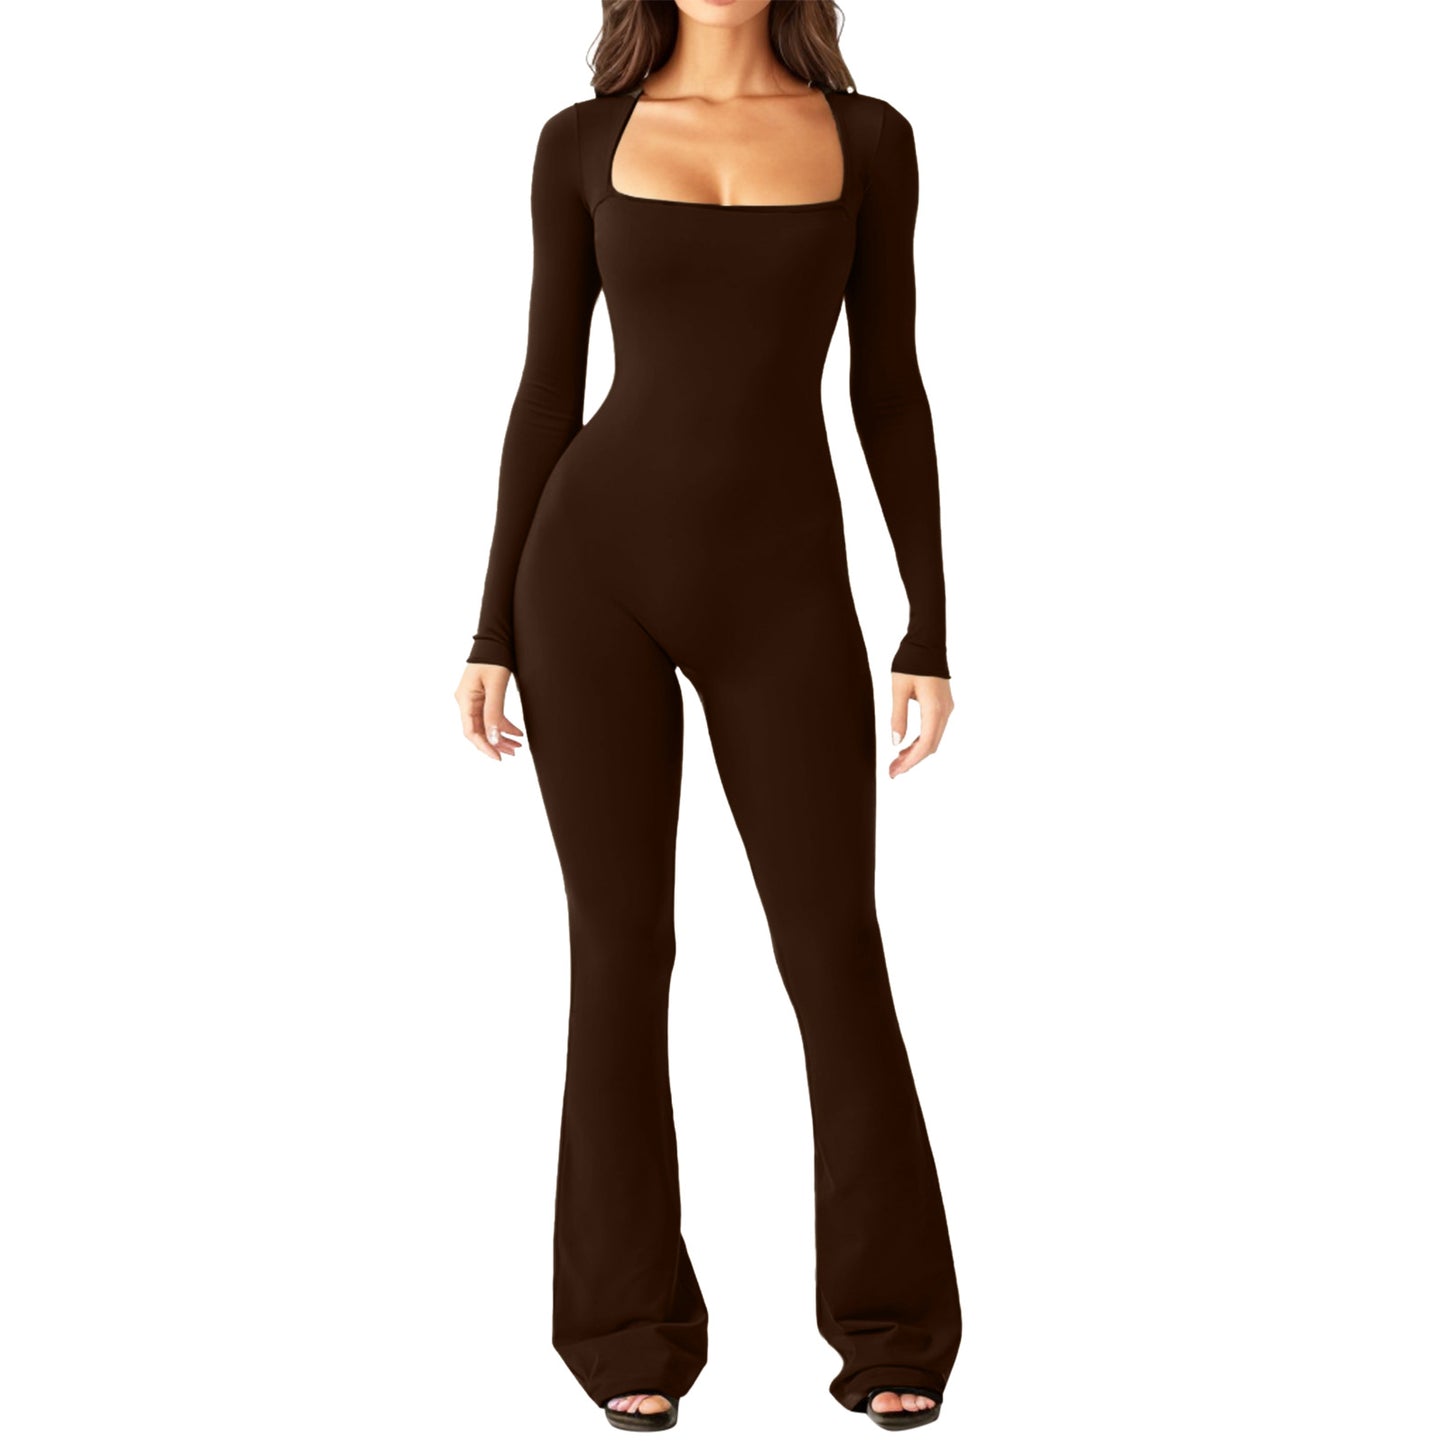 Women's Long Sleeve Belly And Waist Shaping Square Collar High Elastic Jumpsuit